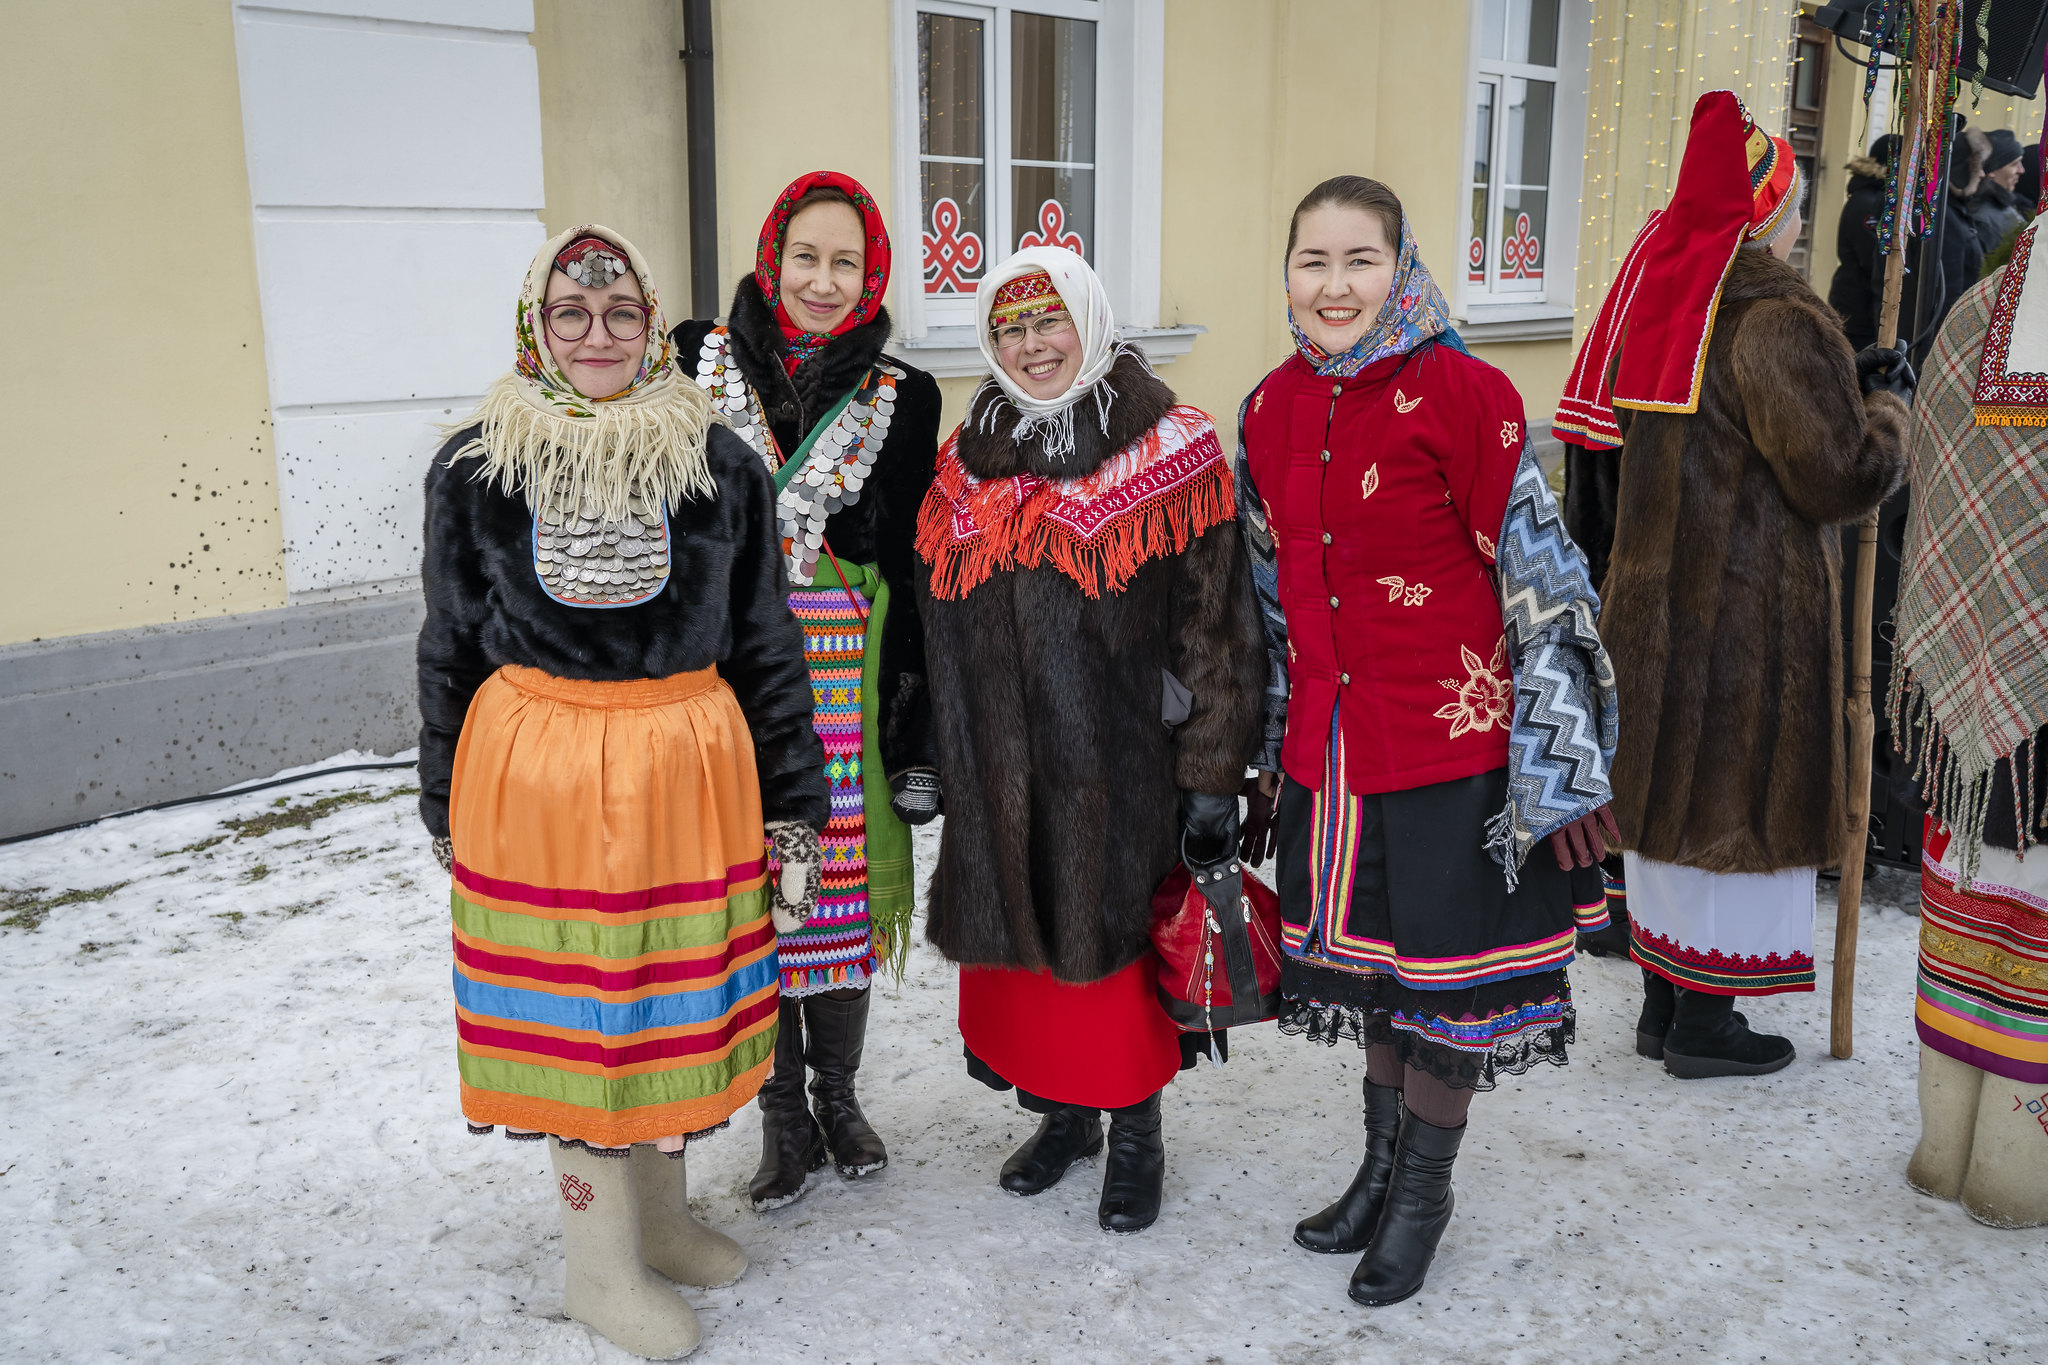 Mulgimaa-takes-centre-stage-as-Estonia-embraces-its-Finno-Ugric-roots-Taavi-Bergmann-IV.jpg